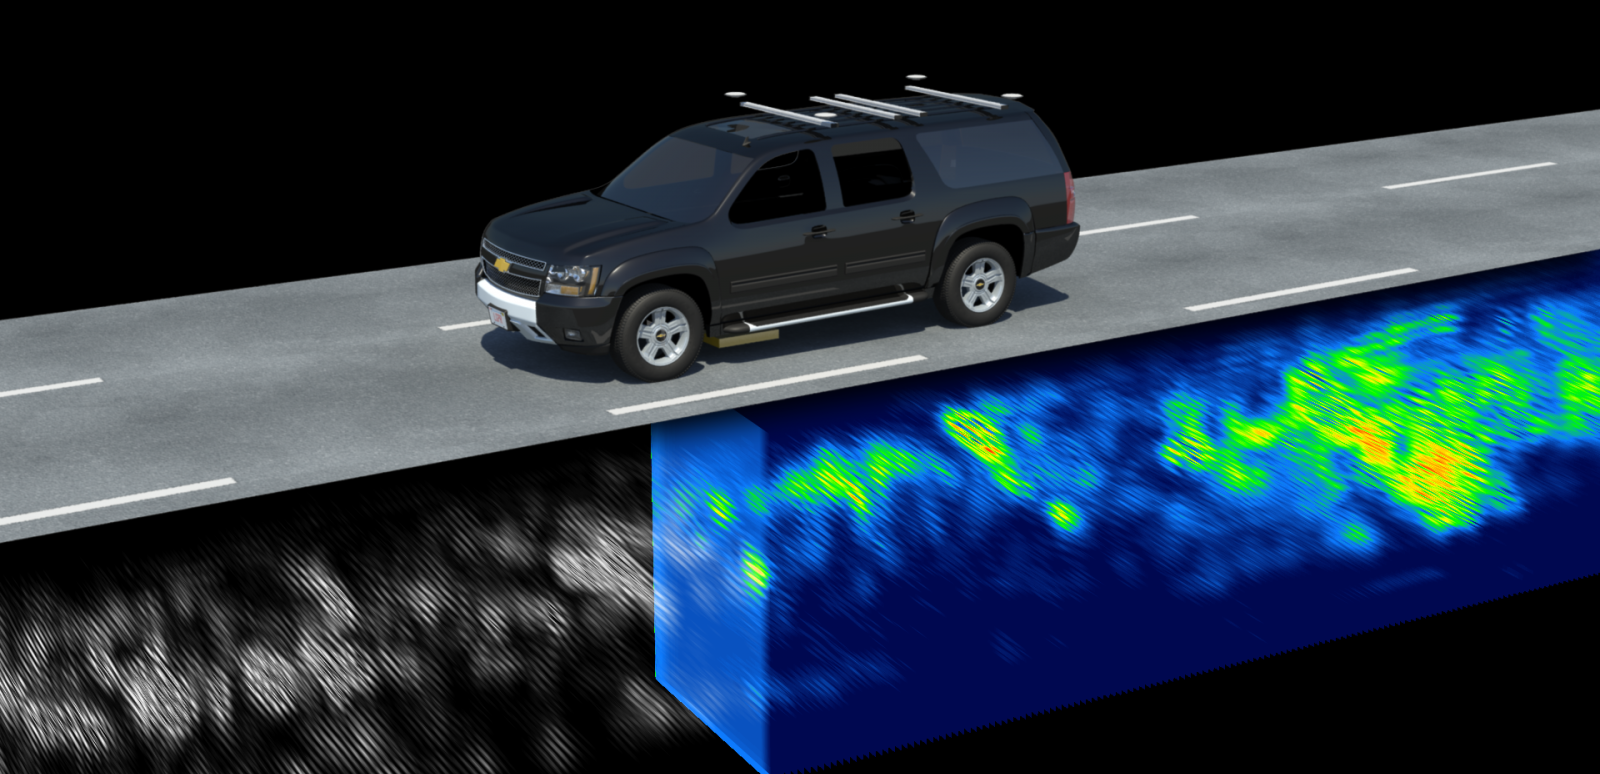 The Localizing Ground-Penetrating Radar (LGPR) uses inherently stable subsurface features and their geolocation to locate the vehicle even in adverse weather conditions. 